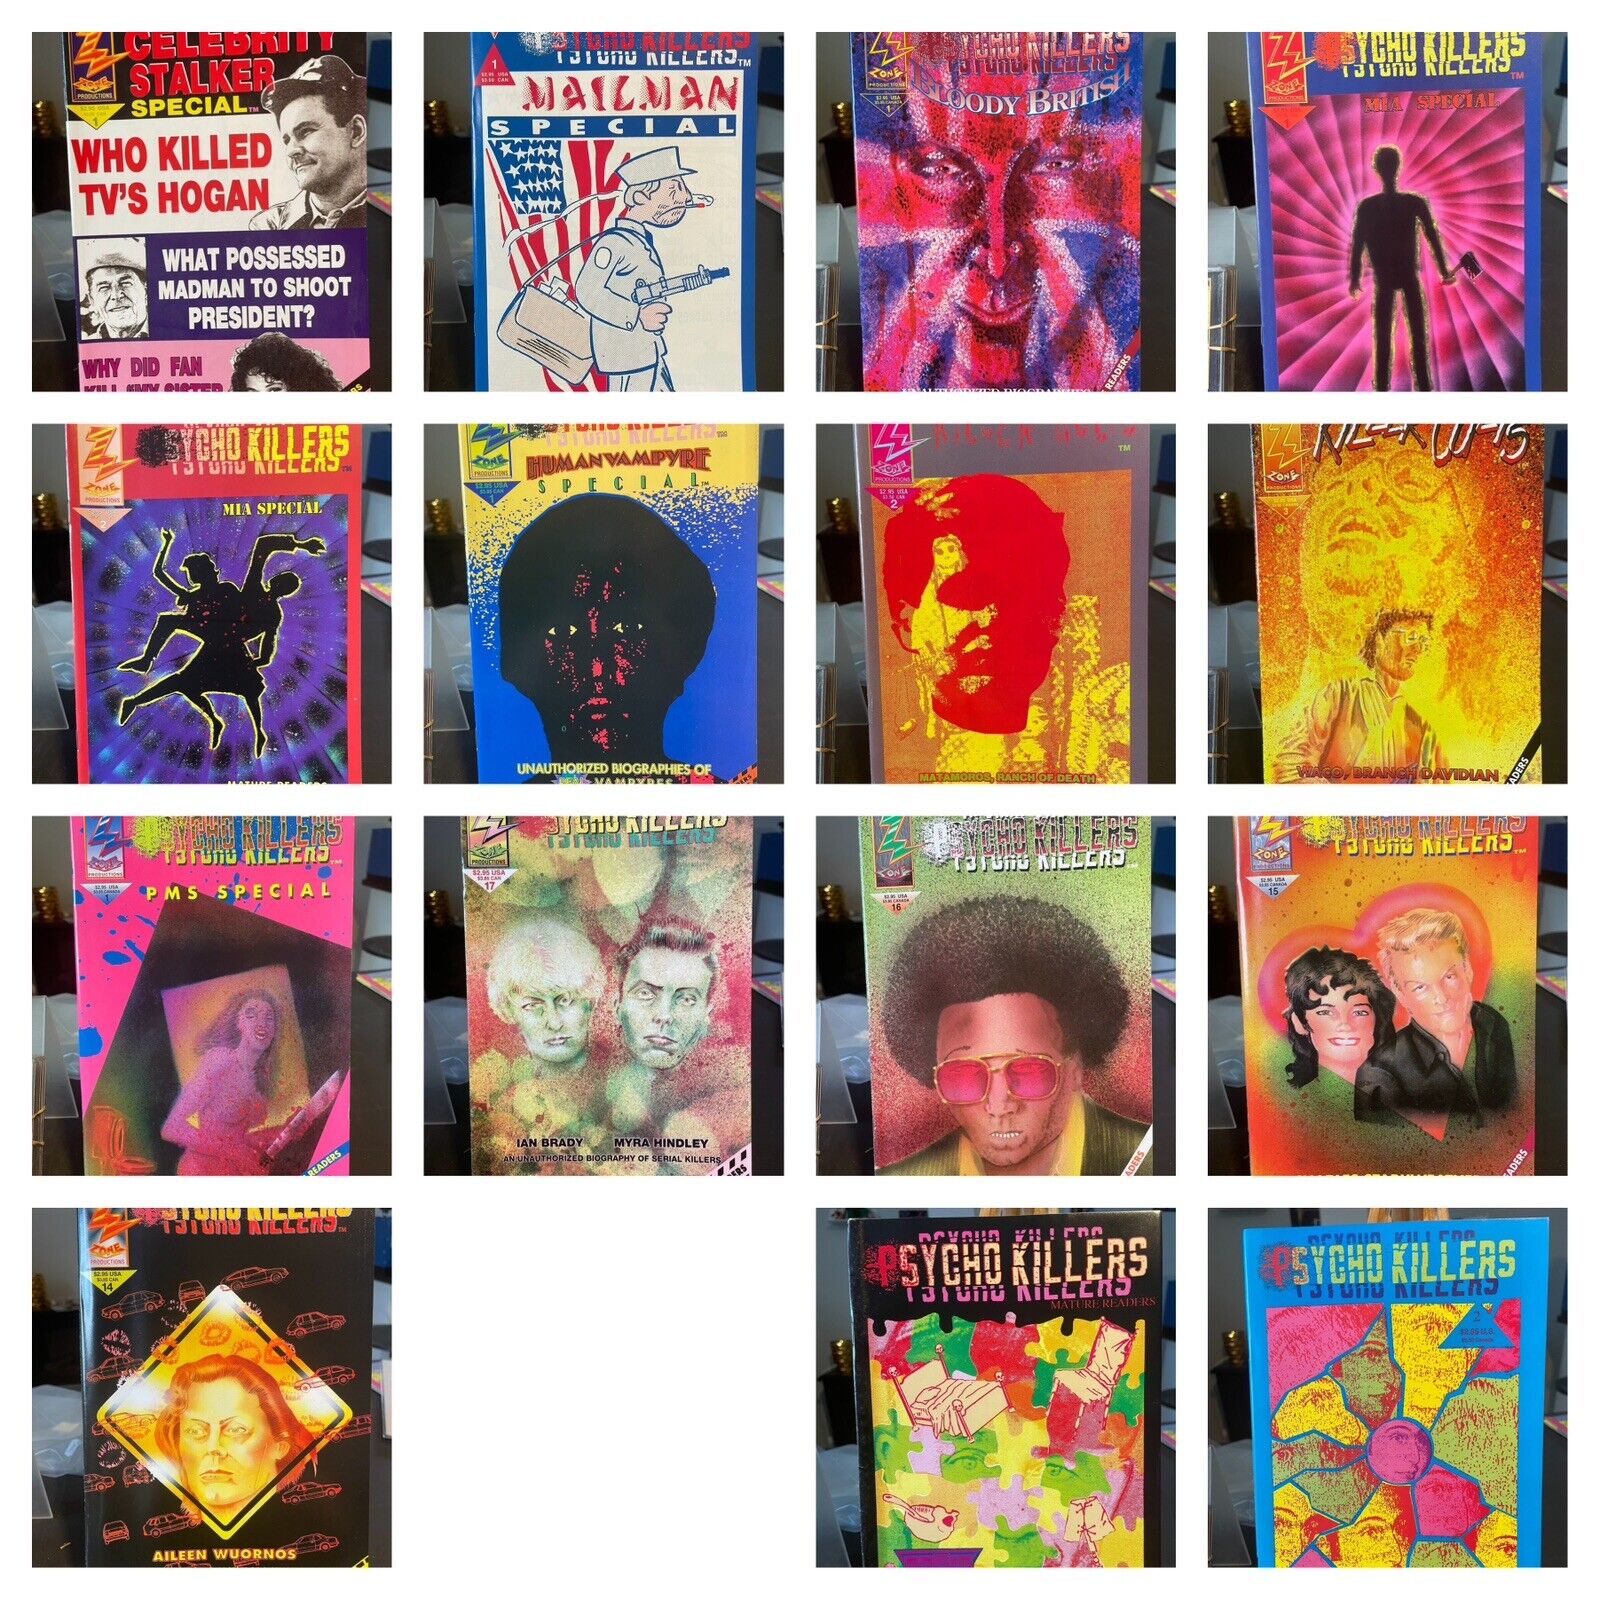 psycho killers comic book lot - 15 issues! Son Of Sam, Gein and more Rare Indie